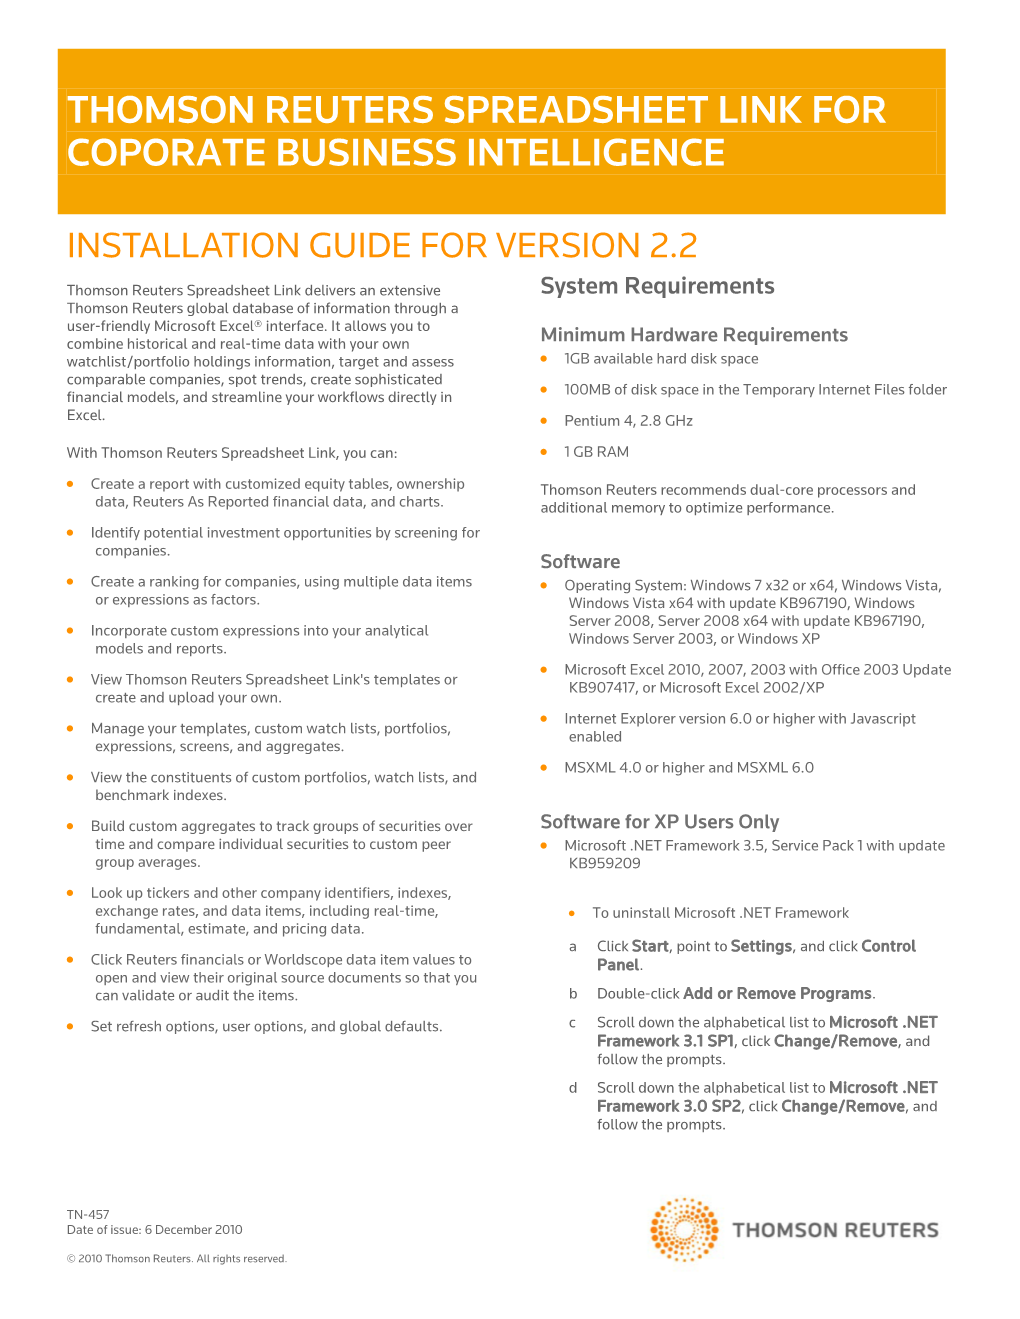 Thomson Reuters Spreadsheet Link for Coporate Business Intelligence